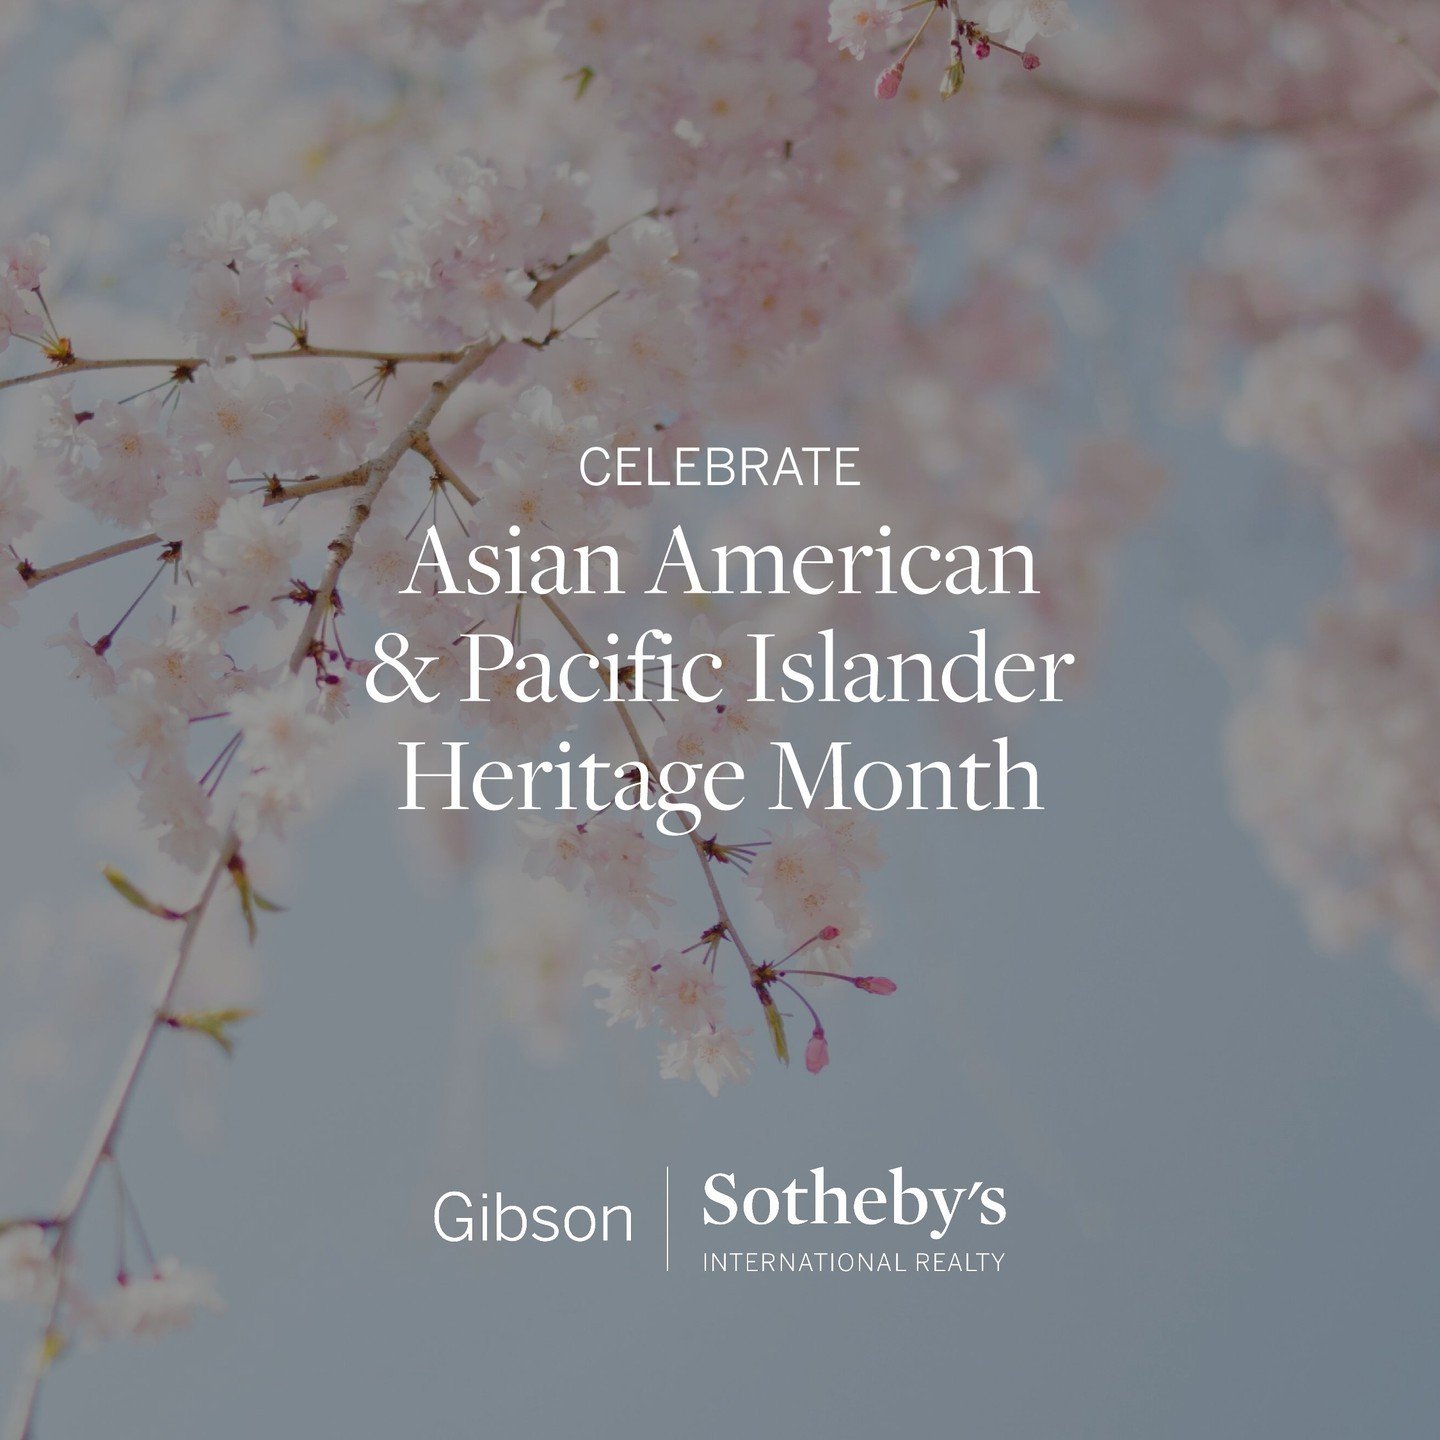 Asian American and Pacific Islander Heritage Month is a time to honor the rich diversity, culture, and contributions of the AAPI community. From art and music to science and technology, AAPI individuals have made immense and lasting impacts worldwide